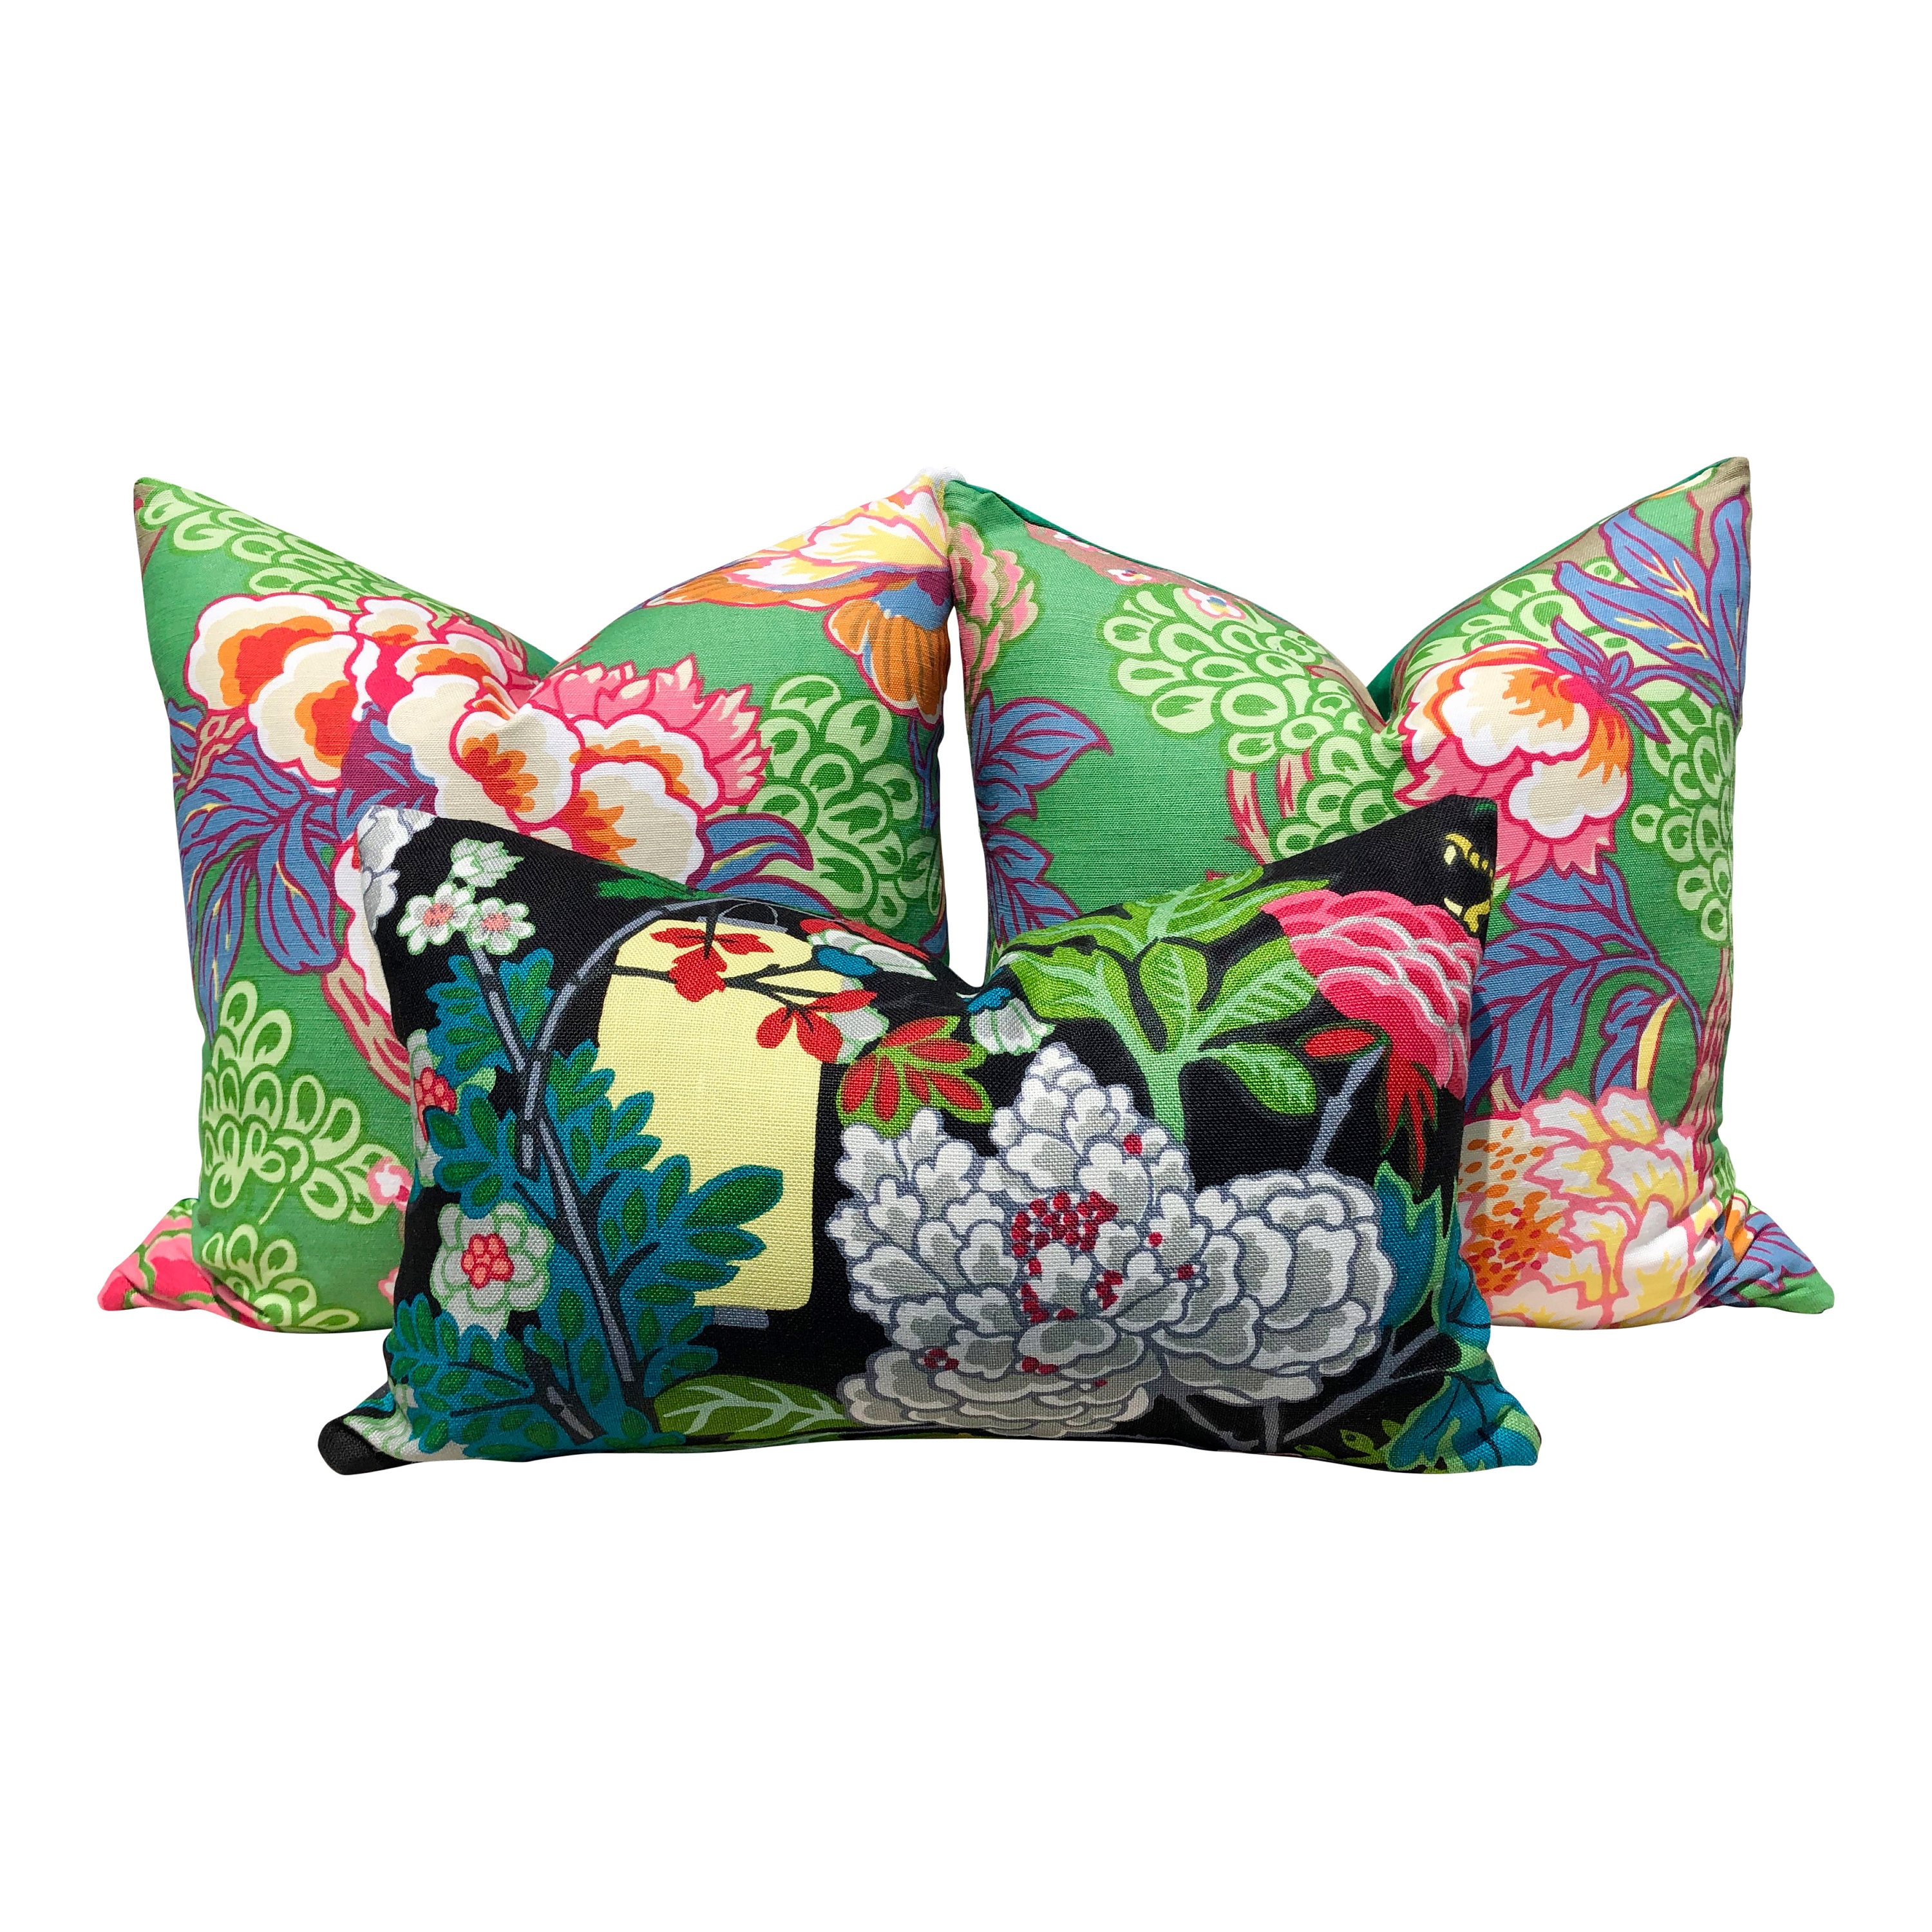 SINGER® Presents: Thread Painted Pillow